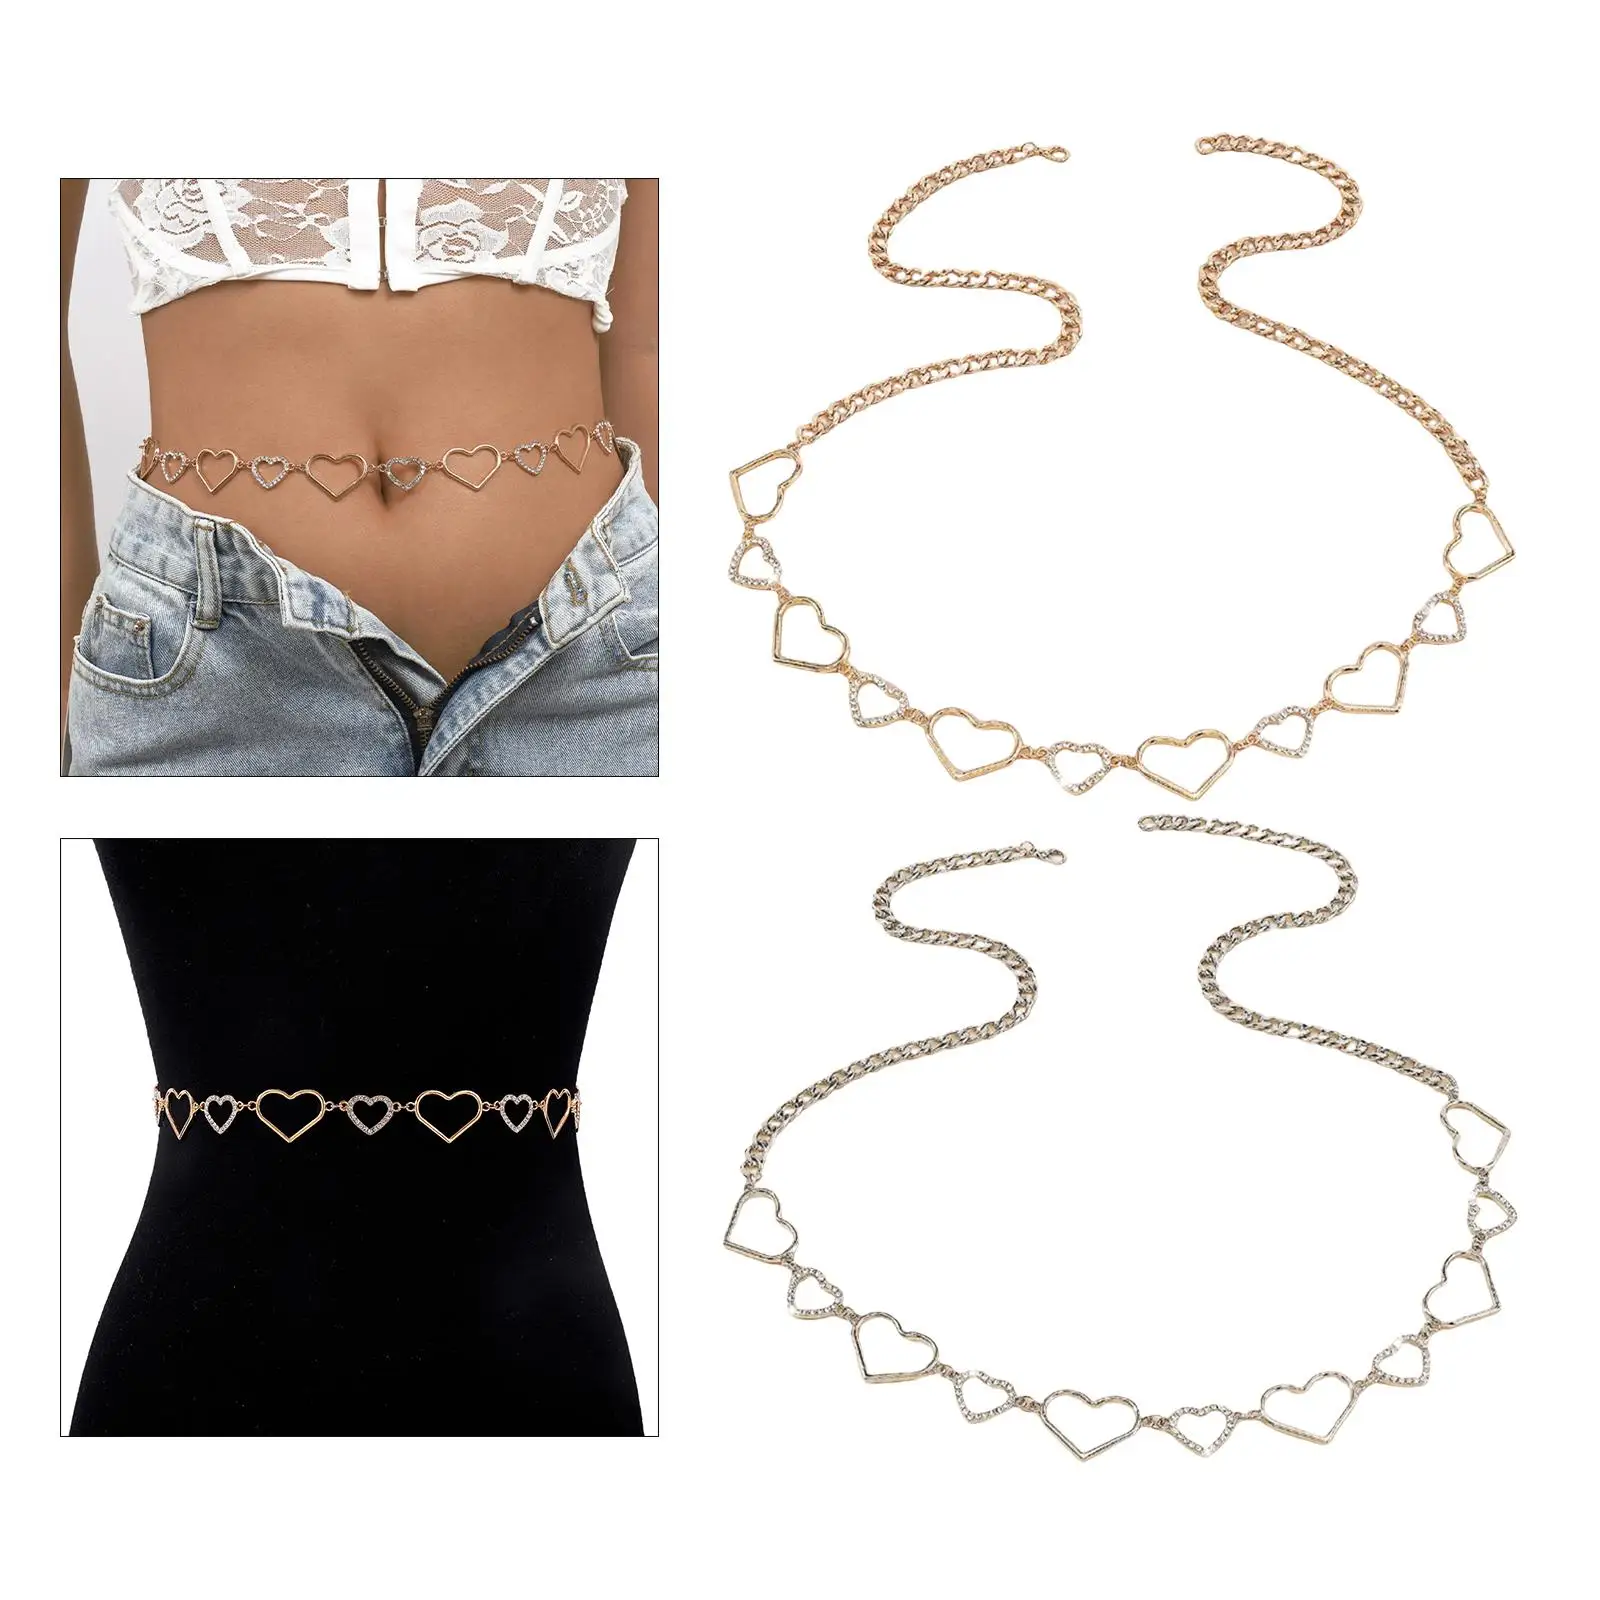 Waist Chain Belt for Women Rhinestone Crystal Jewelry Metal Chain Waistband Body Link for Skirts Accessories Jeans